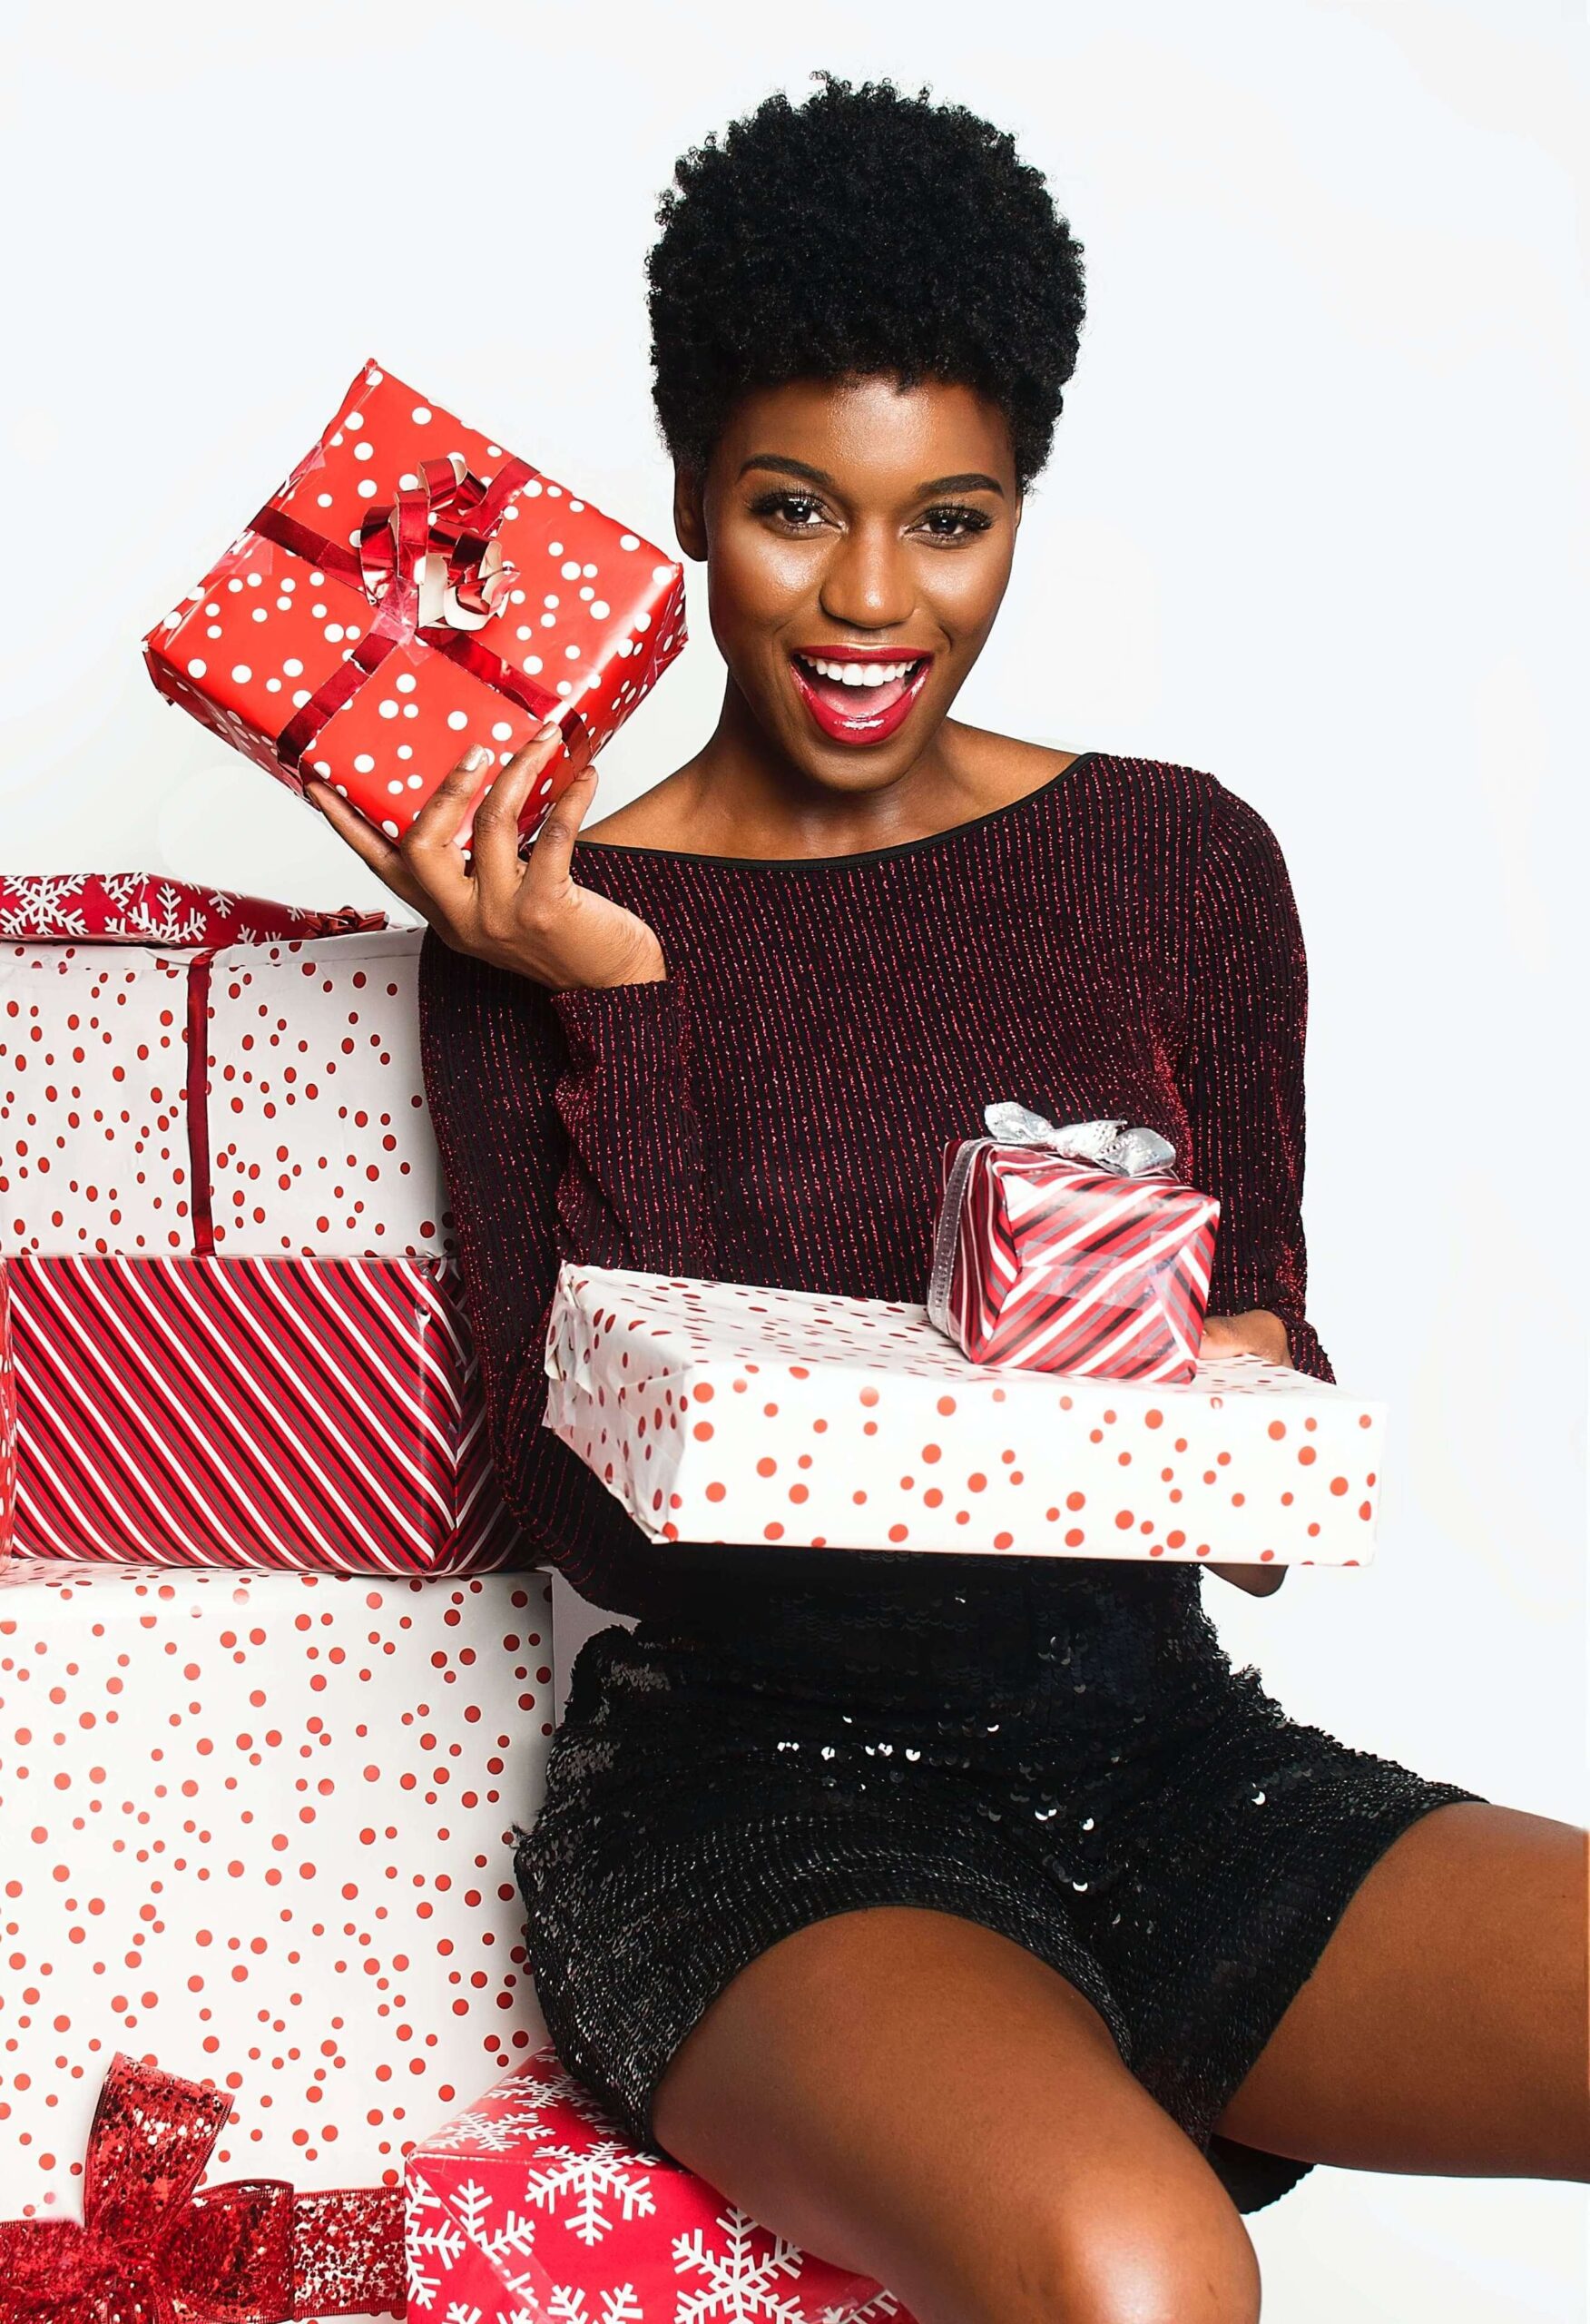 the Best Christmas gifts for women- pack in one day